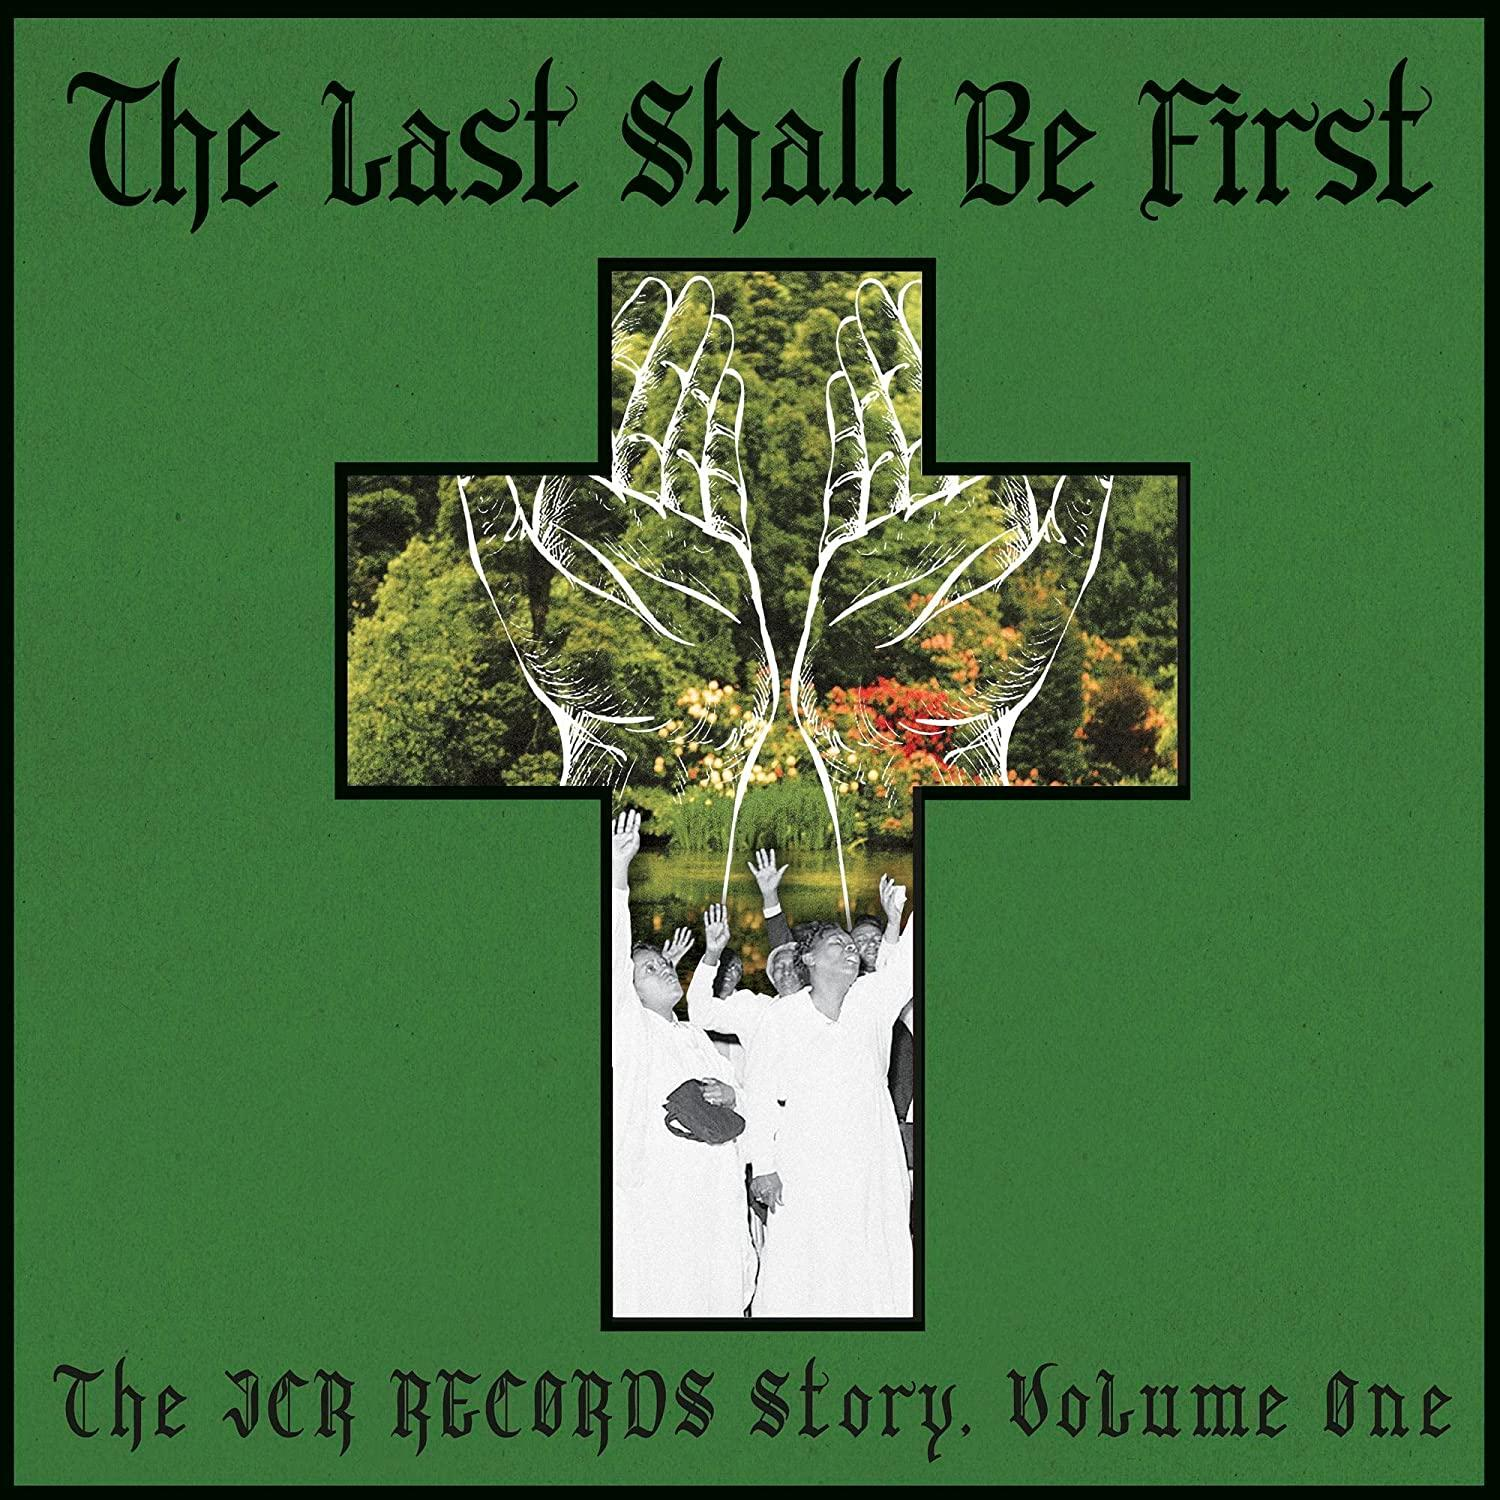 VARIOUS - LAST STORY (CD) FIRST: RECORDS JCR THE SHALL BE 